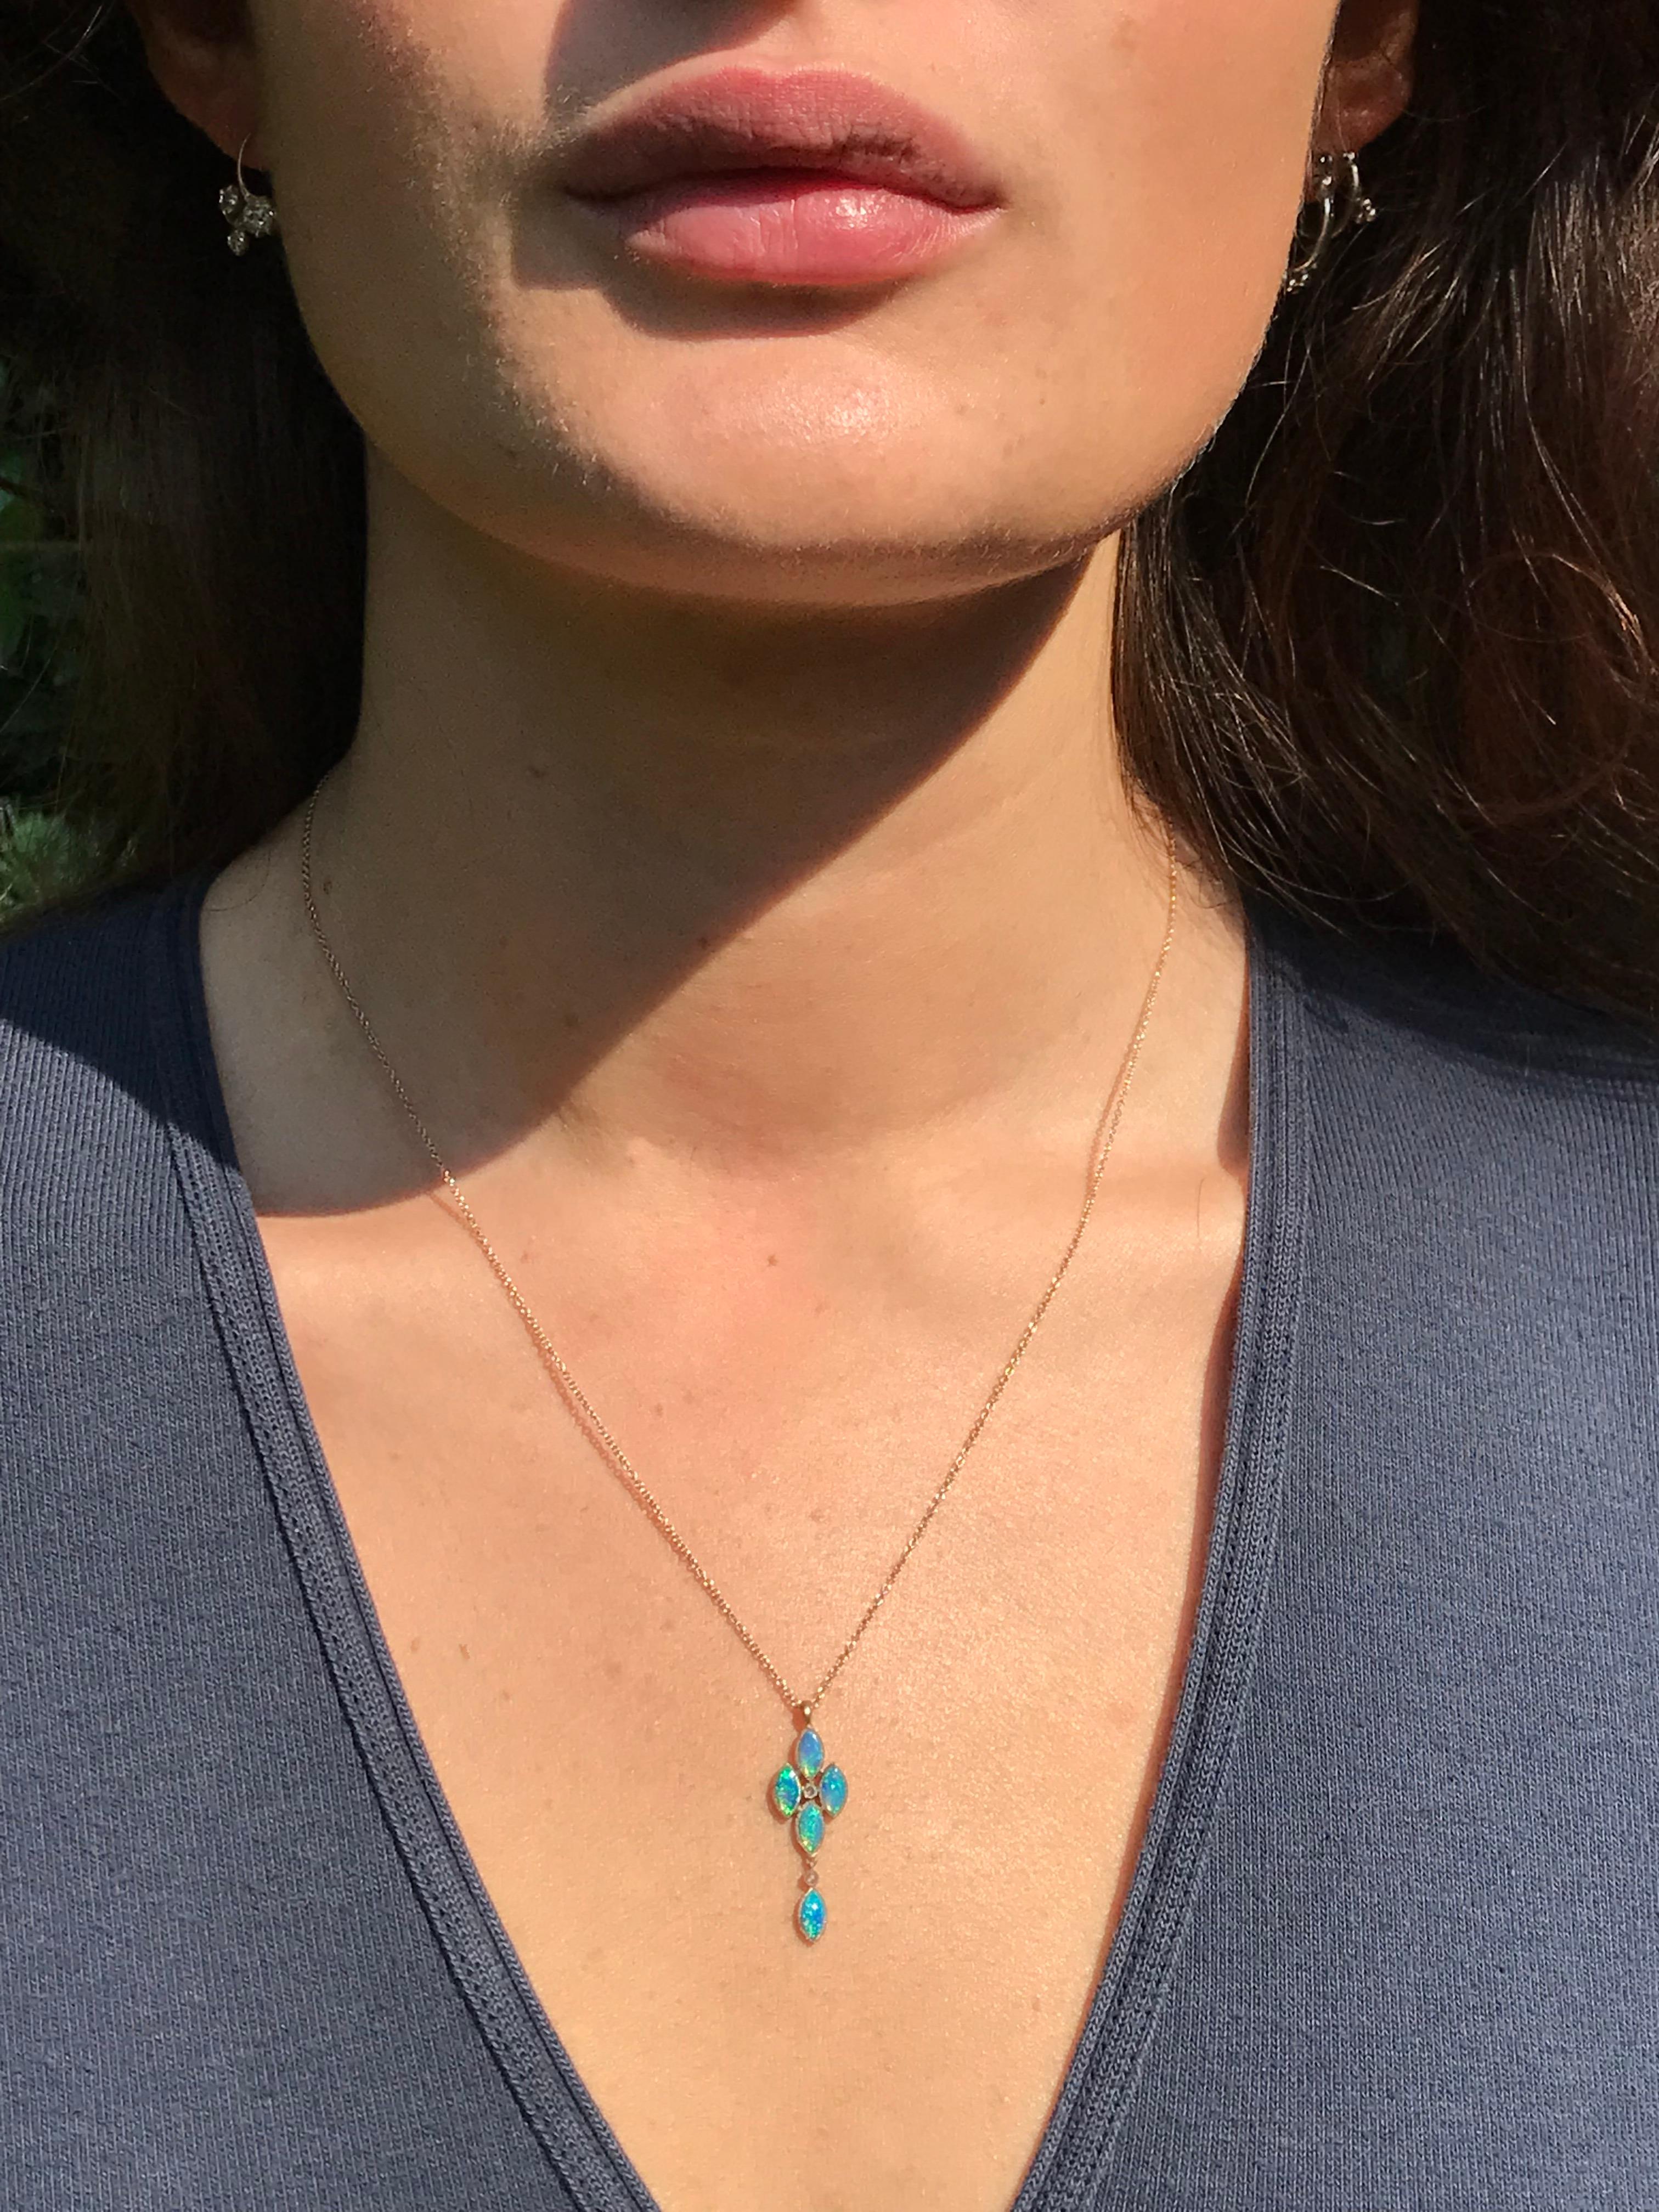 Dalben design Opal pendant necklace with 5 blue-green Australian Opals and 2 rose cut Diamonds weight  0,02 carats mounted in 18 kt  white gold. 
Pendant dimension: 
max width 9,5 mm 
height 30 mm
height with leverback 34 mm
Chain length 48 cm ( 19